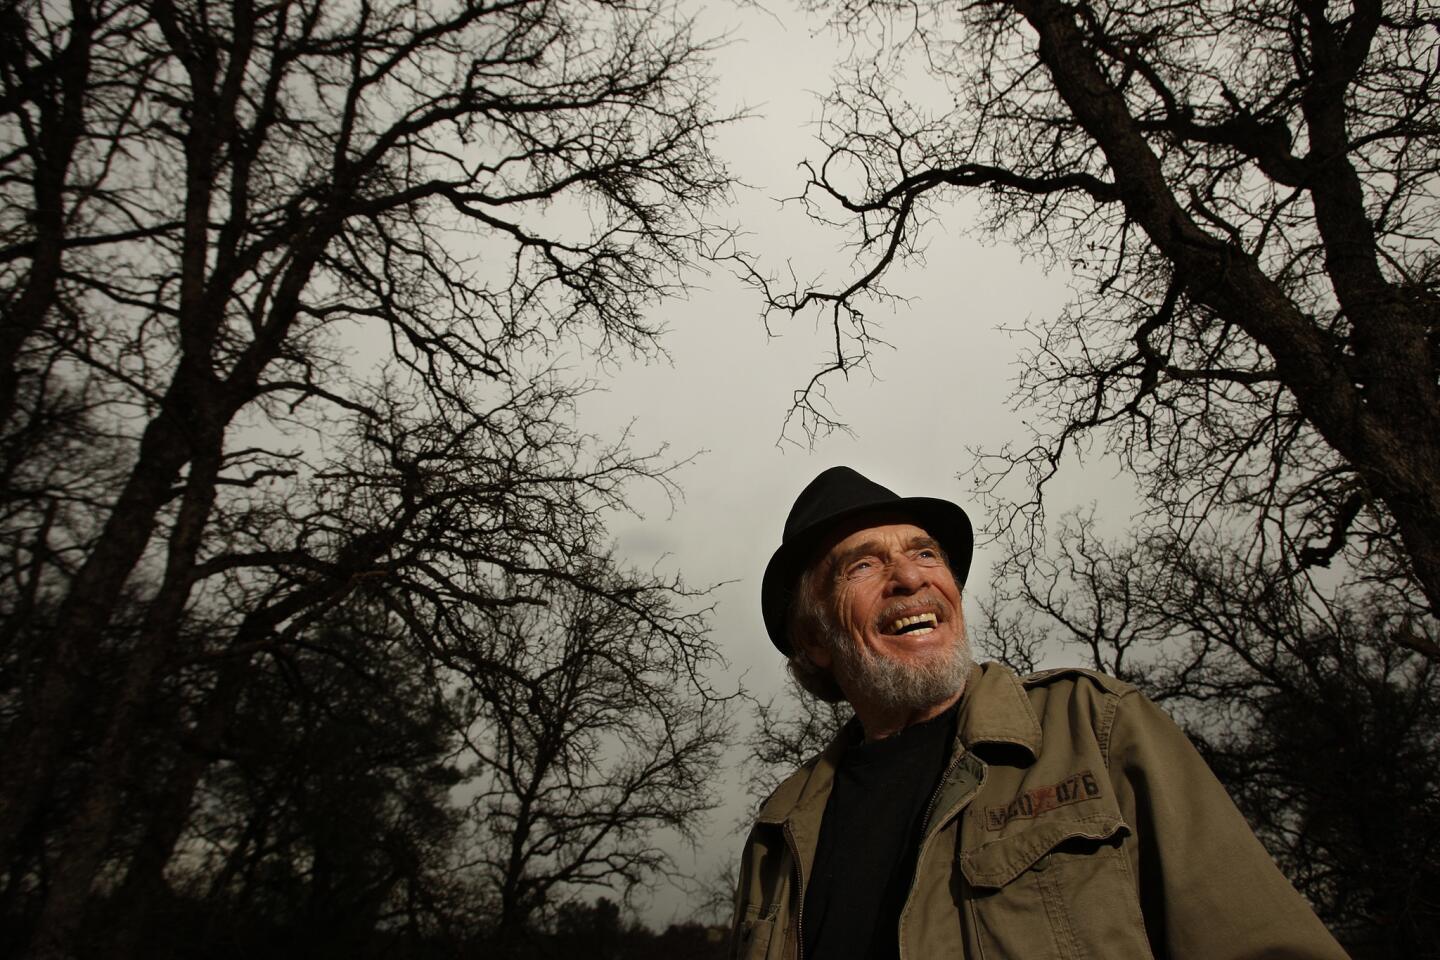 Country music legend Merle Haggard on his property in Palo Cedro, Calif.